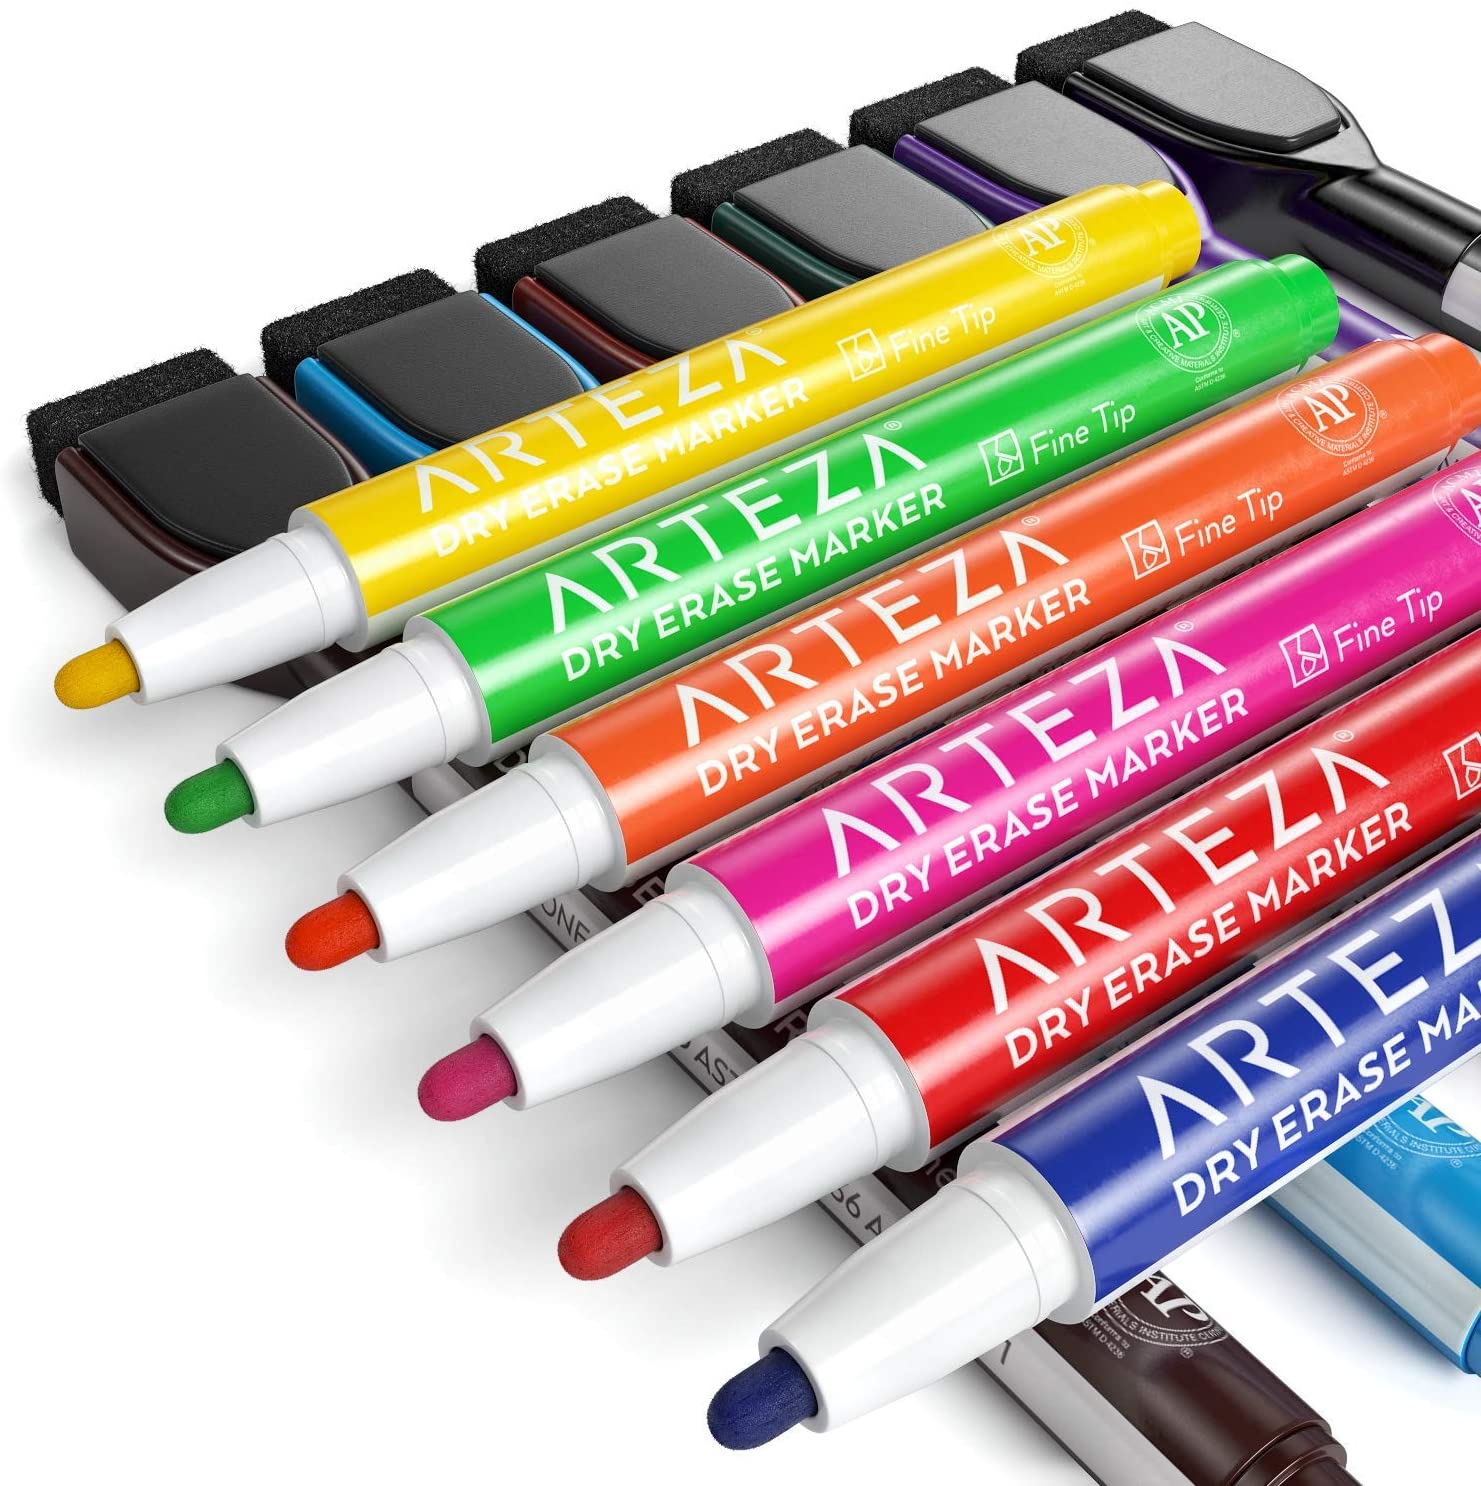 ARTEZA Colored Permanent Markers, Set of 24, 1 Count (Pack 24), Assorted